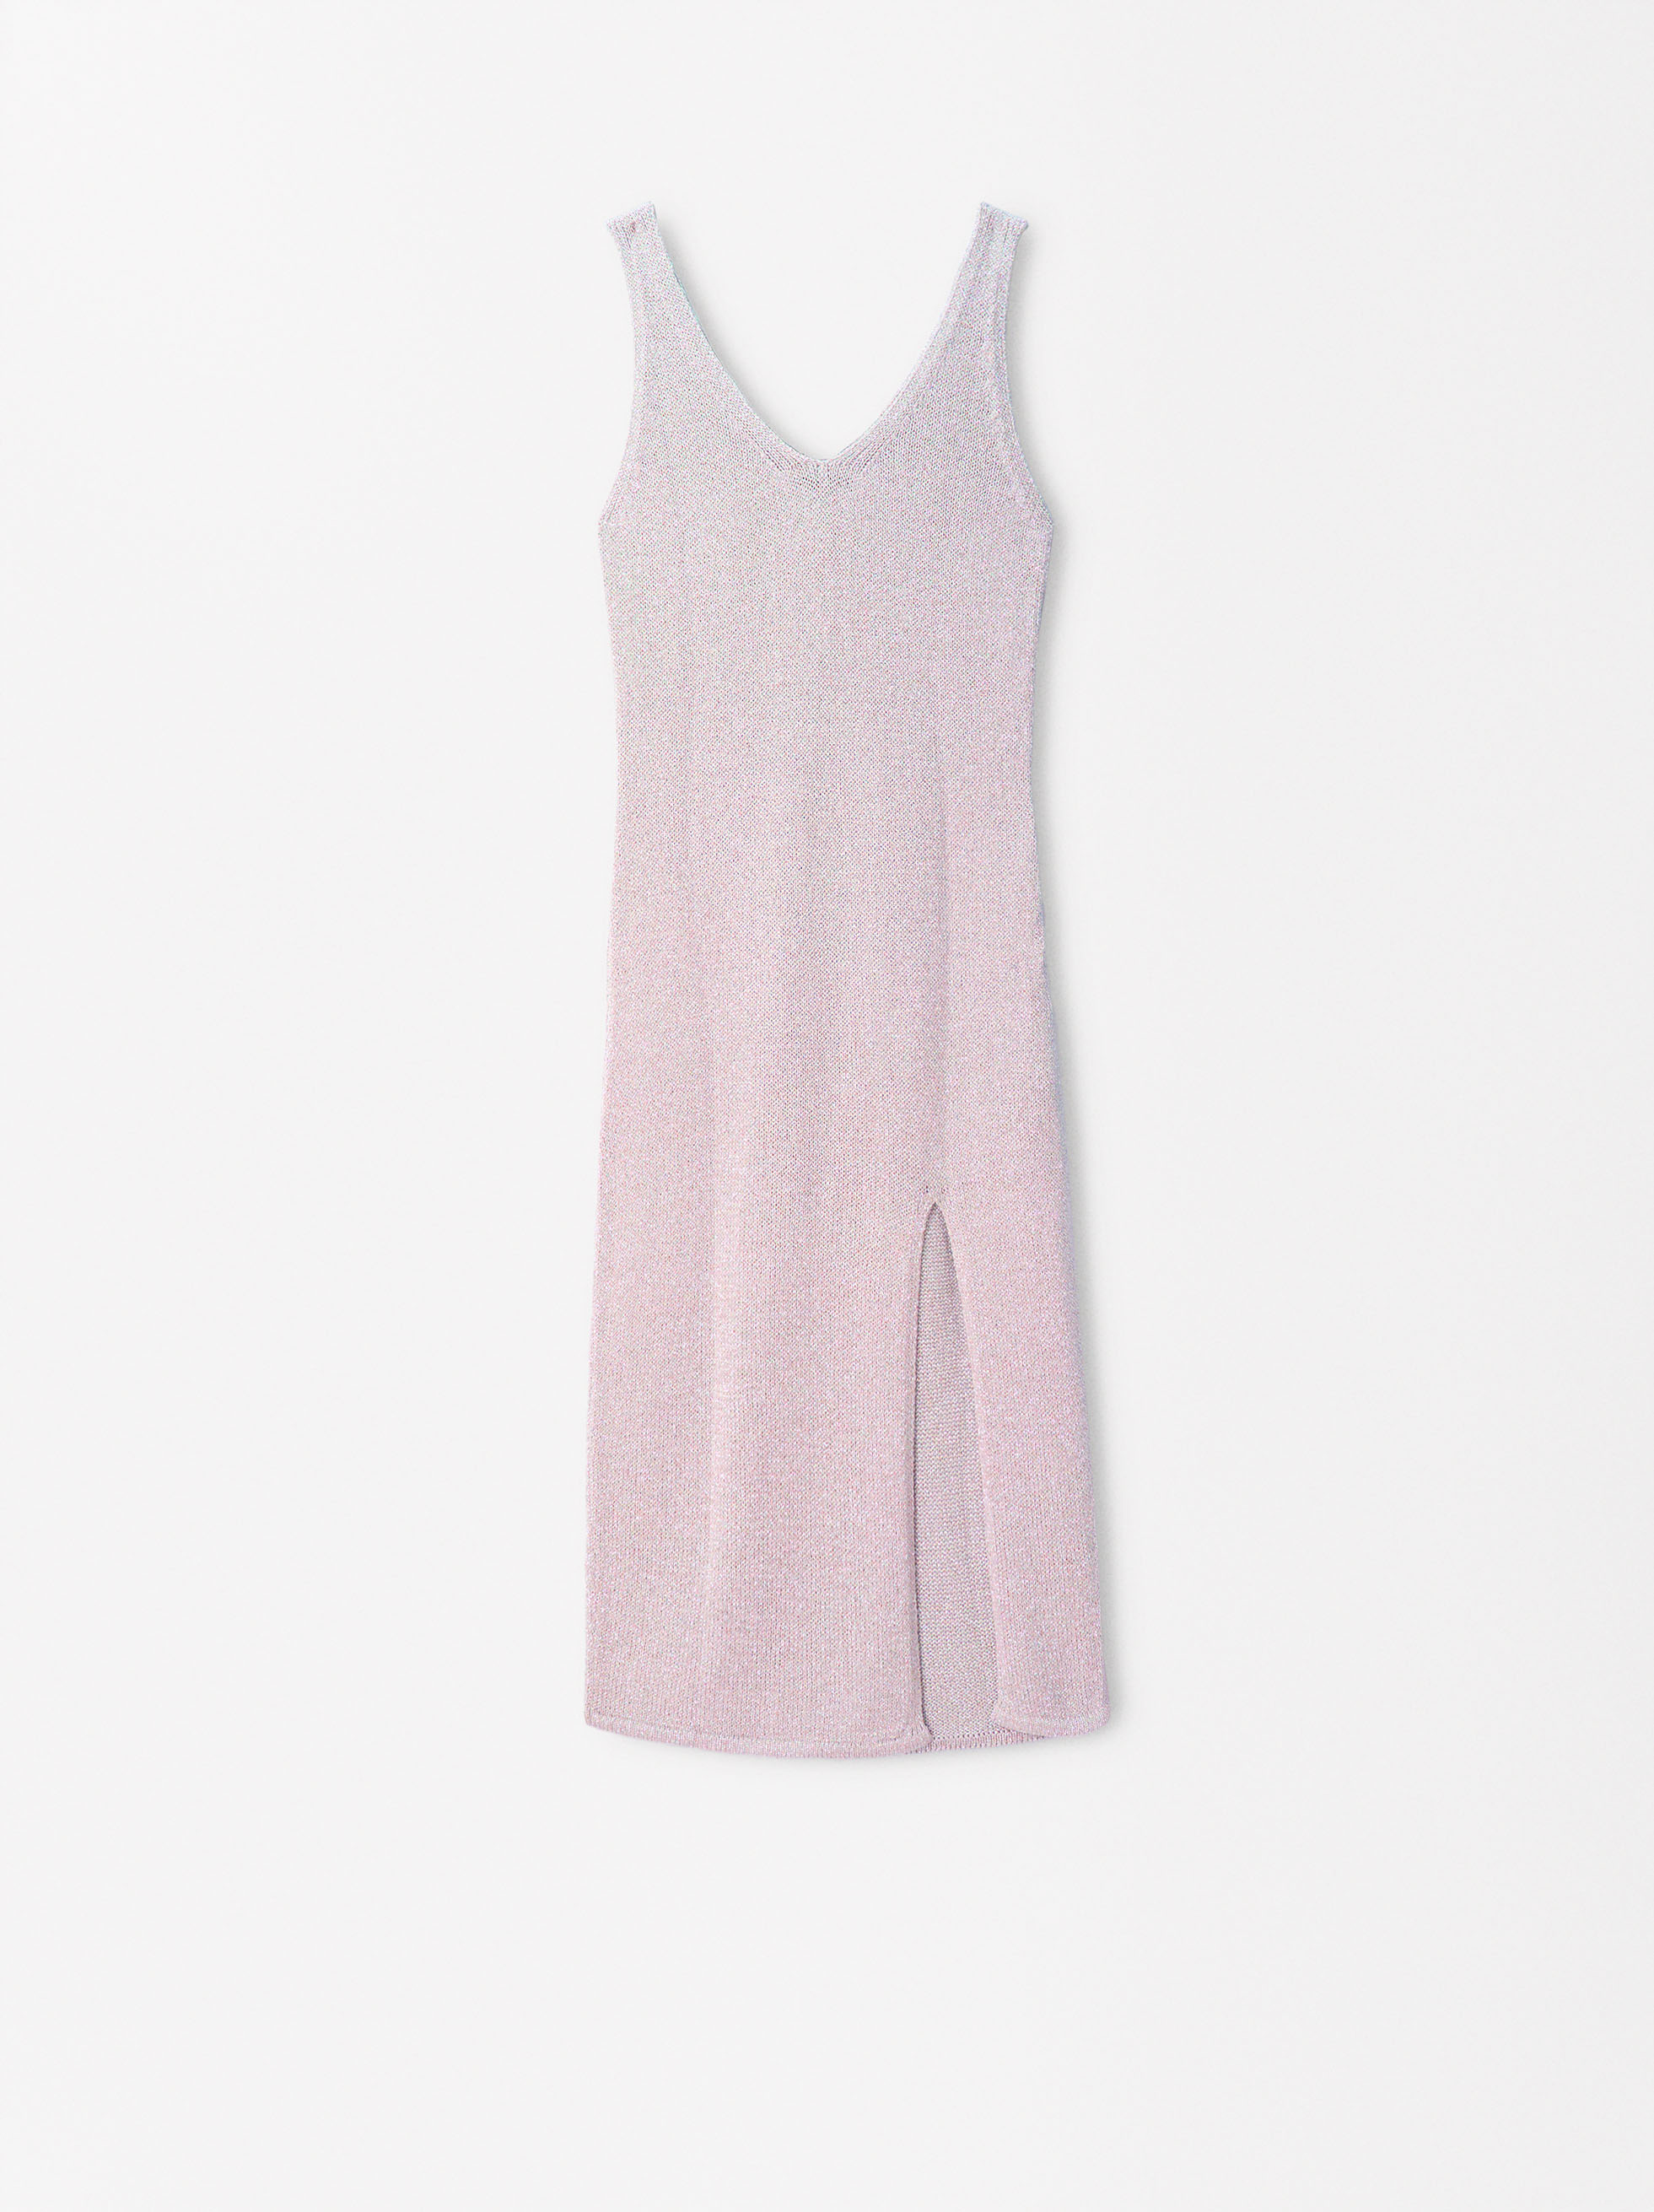 Online Exclusive - Knit Dress image number 4.0